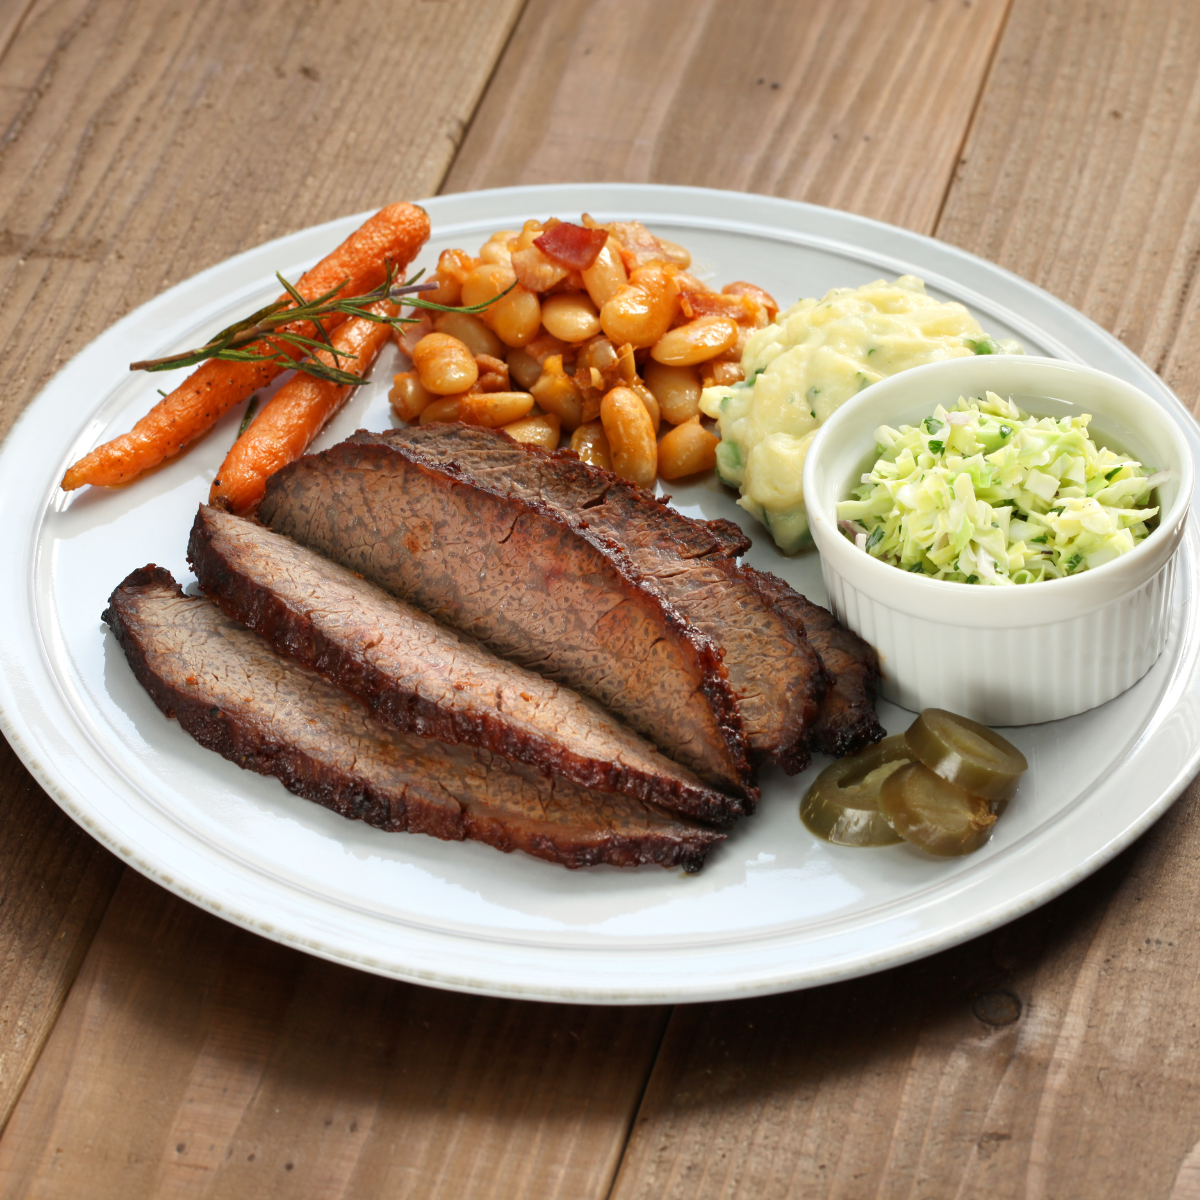 view of sliced cooked brisket dinner with sides to show can you cut a brisket in half